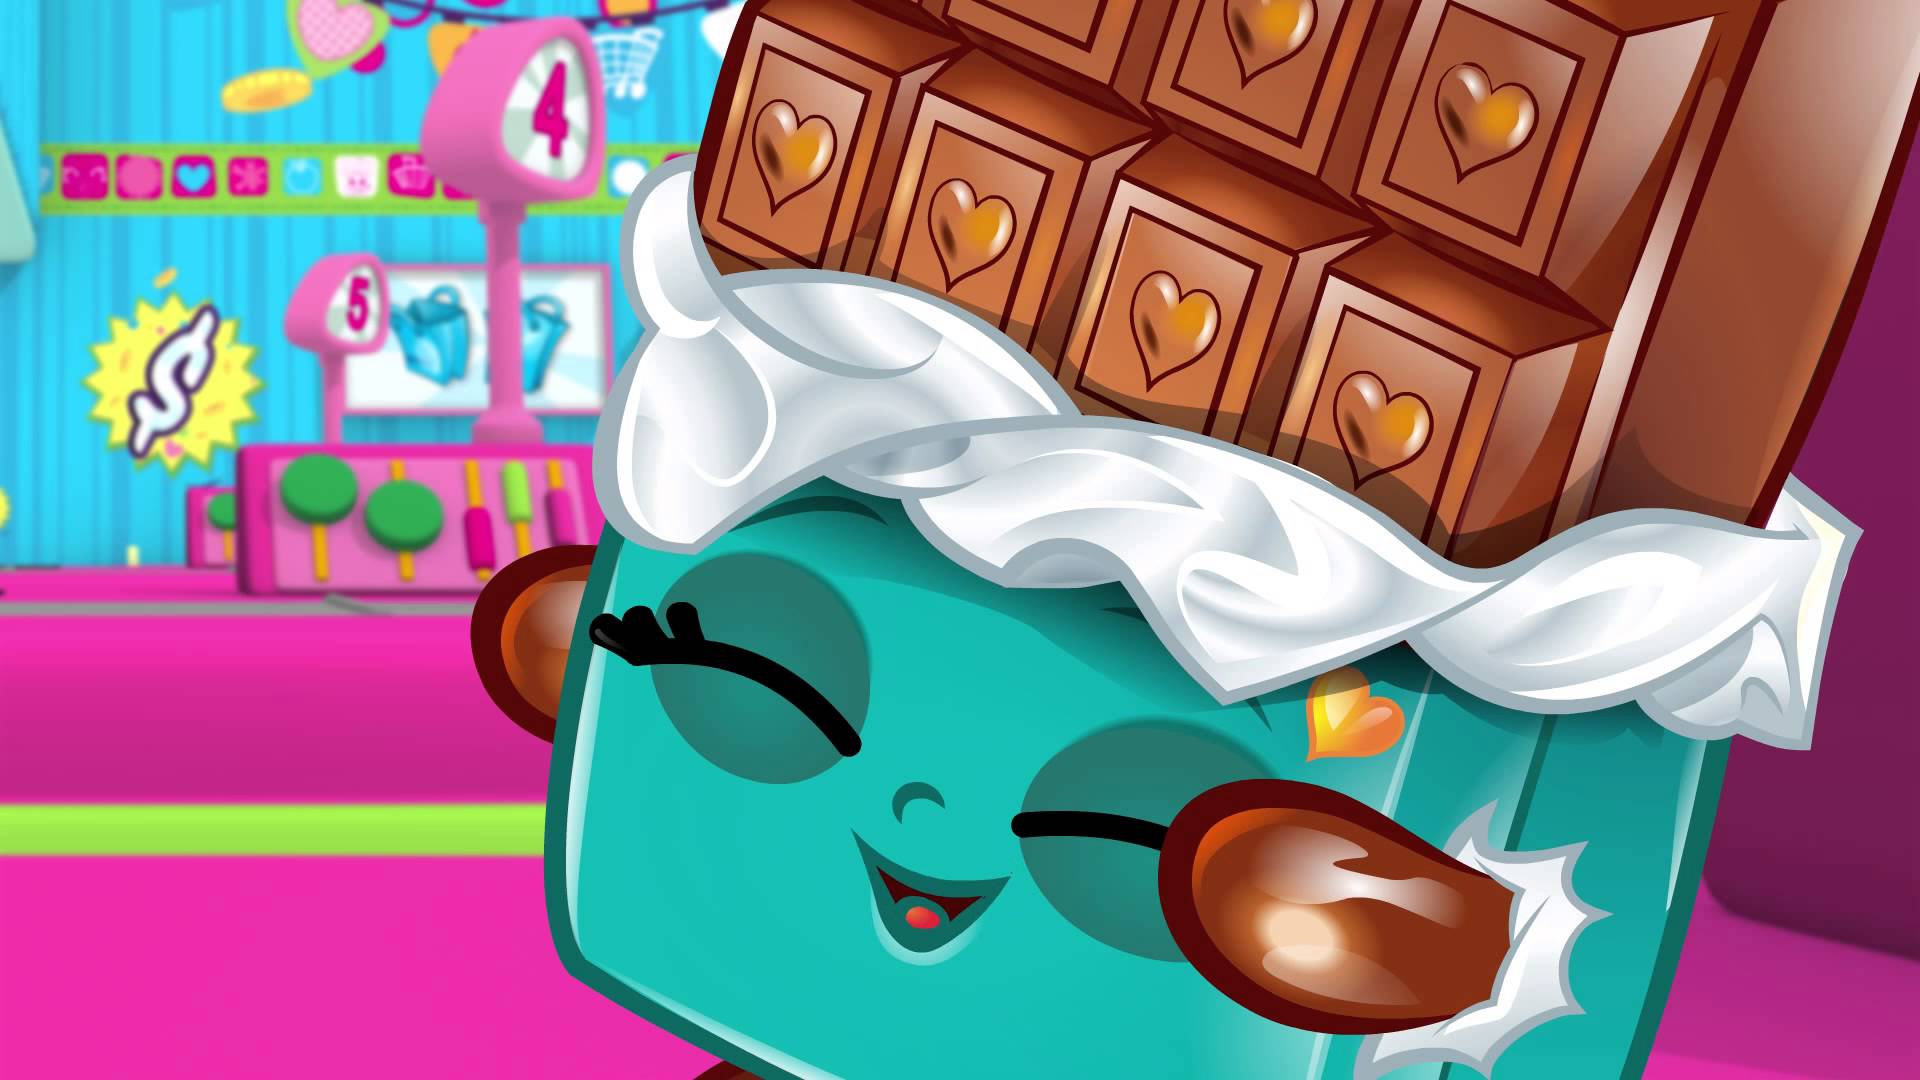 Cute Shopkins Cartoon Episode Check It Out Buy